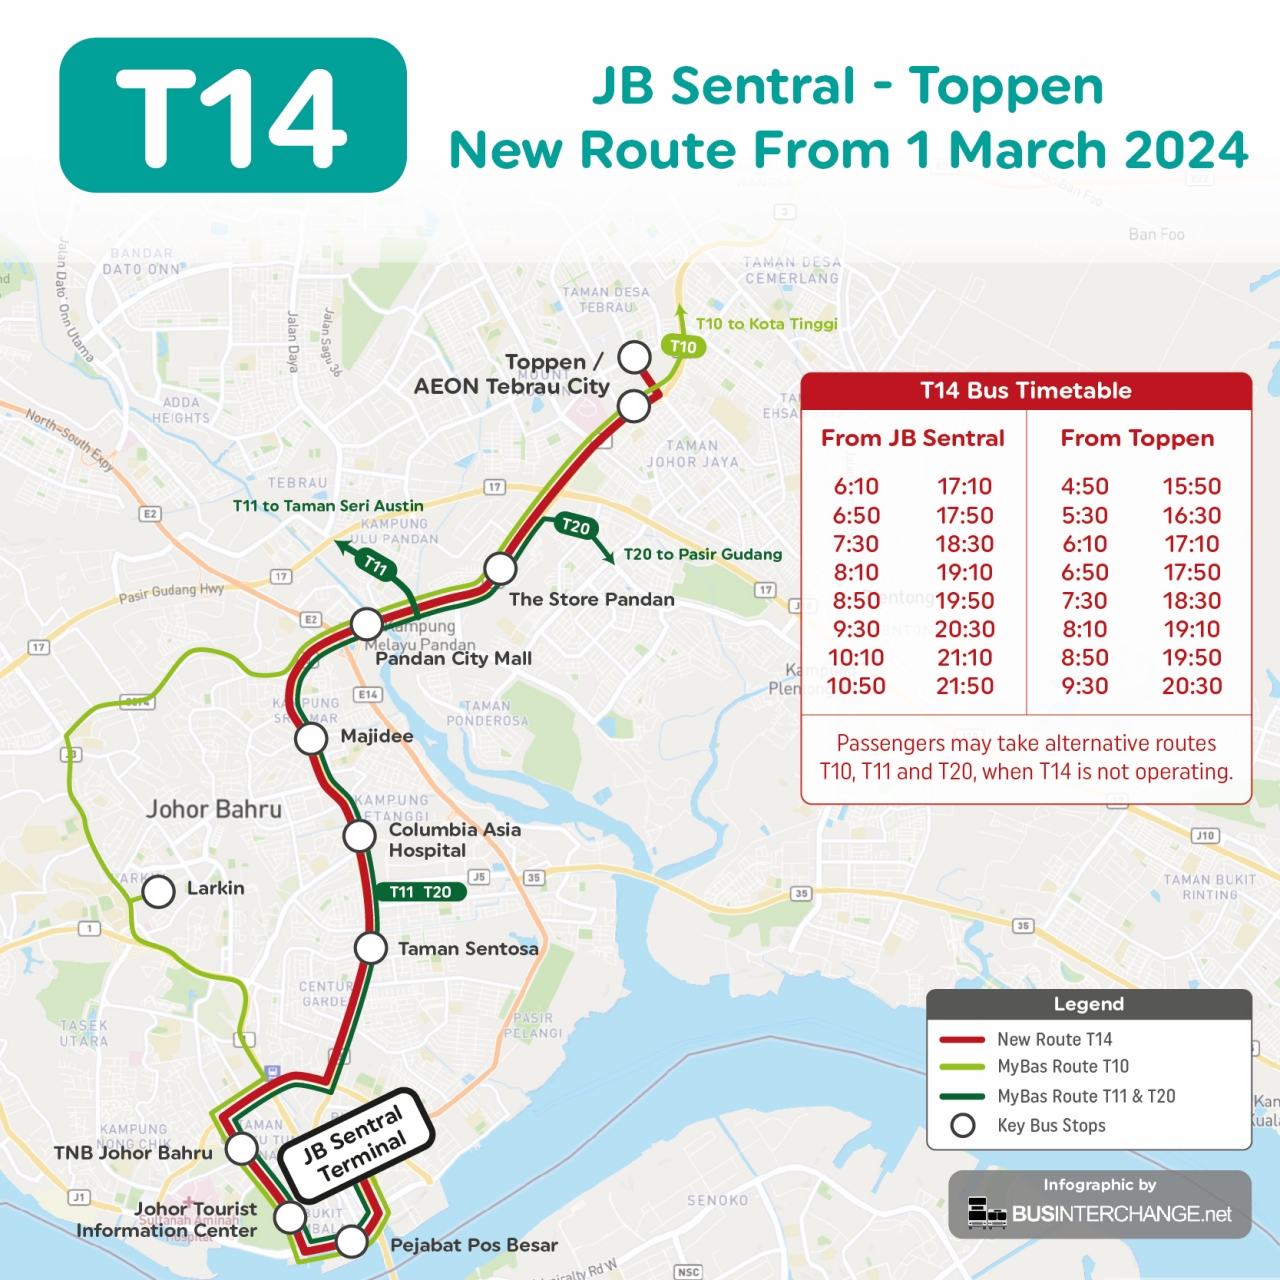 New myBas Johor Bahru Route T14 runs from JB Sentral to Toppen Tebrau from 1 March 2024